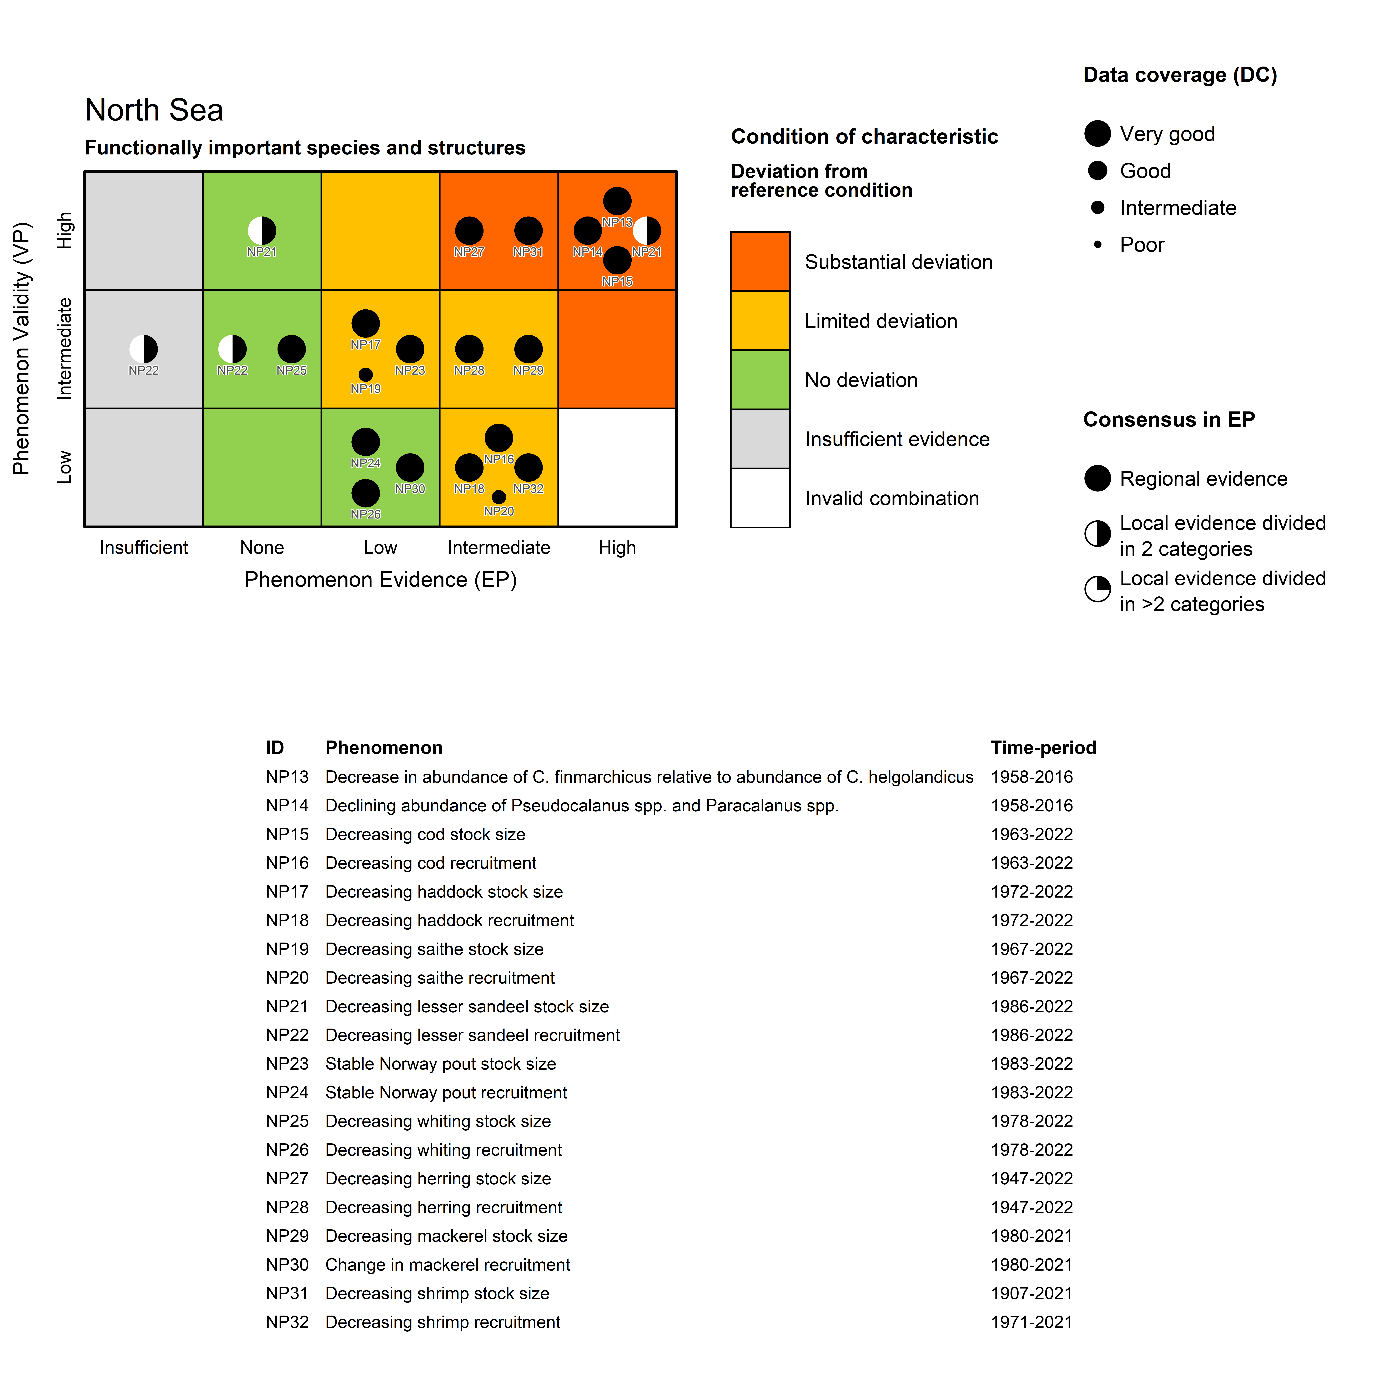 Figure 7.3.1 (iv): The PAEC assessment diagram for the Functionally important species and biophysical structures ecosystem characteristic of the North Sea. The table below list the indicators included in this ecosystem characteristic, their associated phenomenon, and the time period covered by the data used to assess the evidence for the phenomenon.